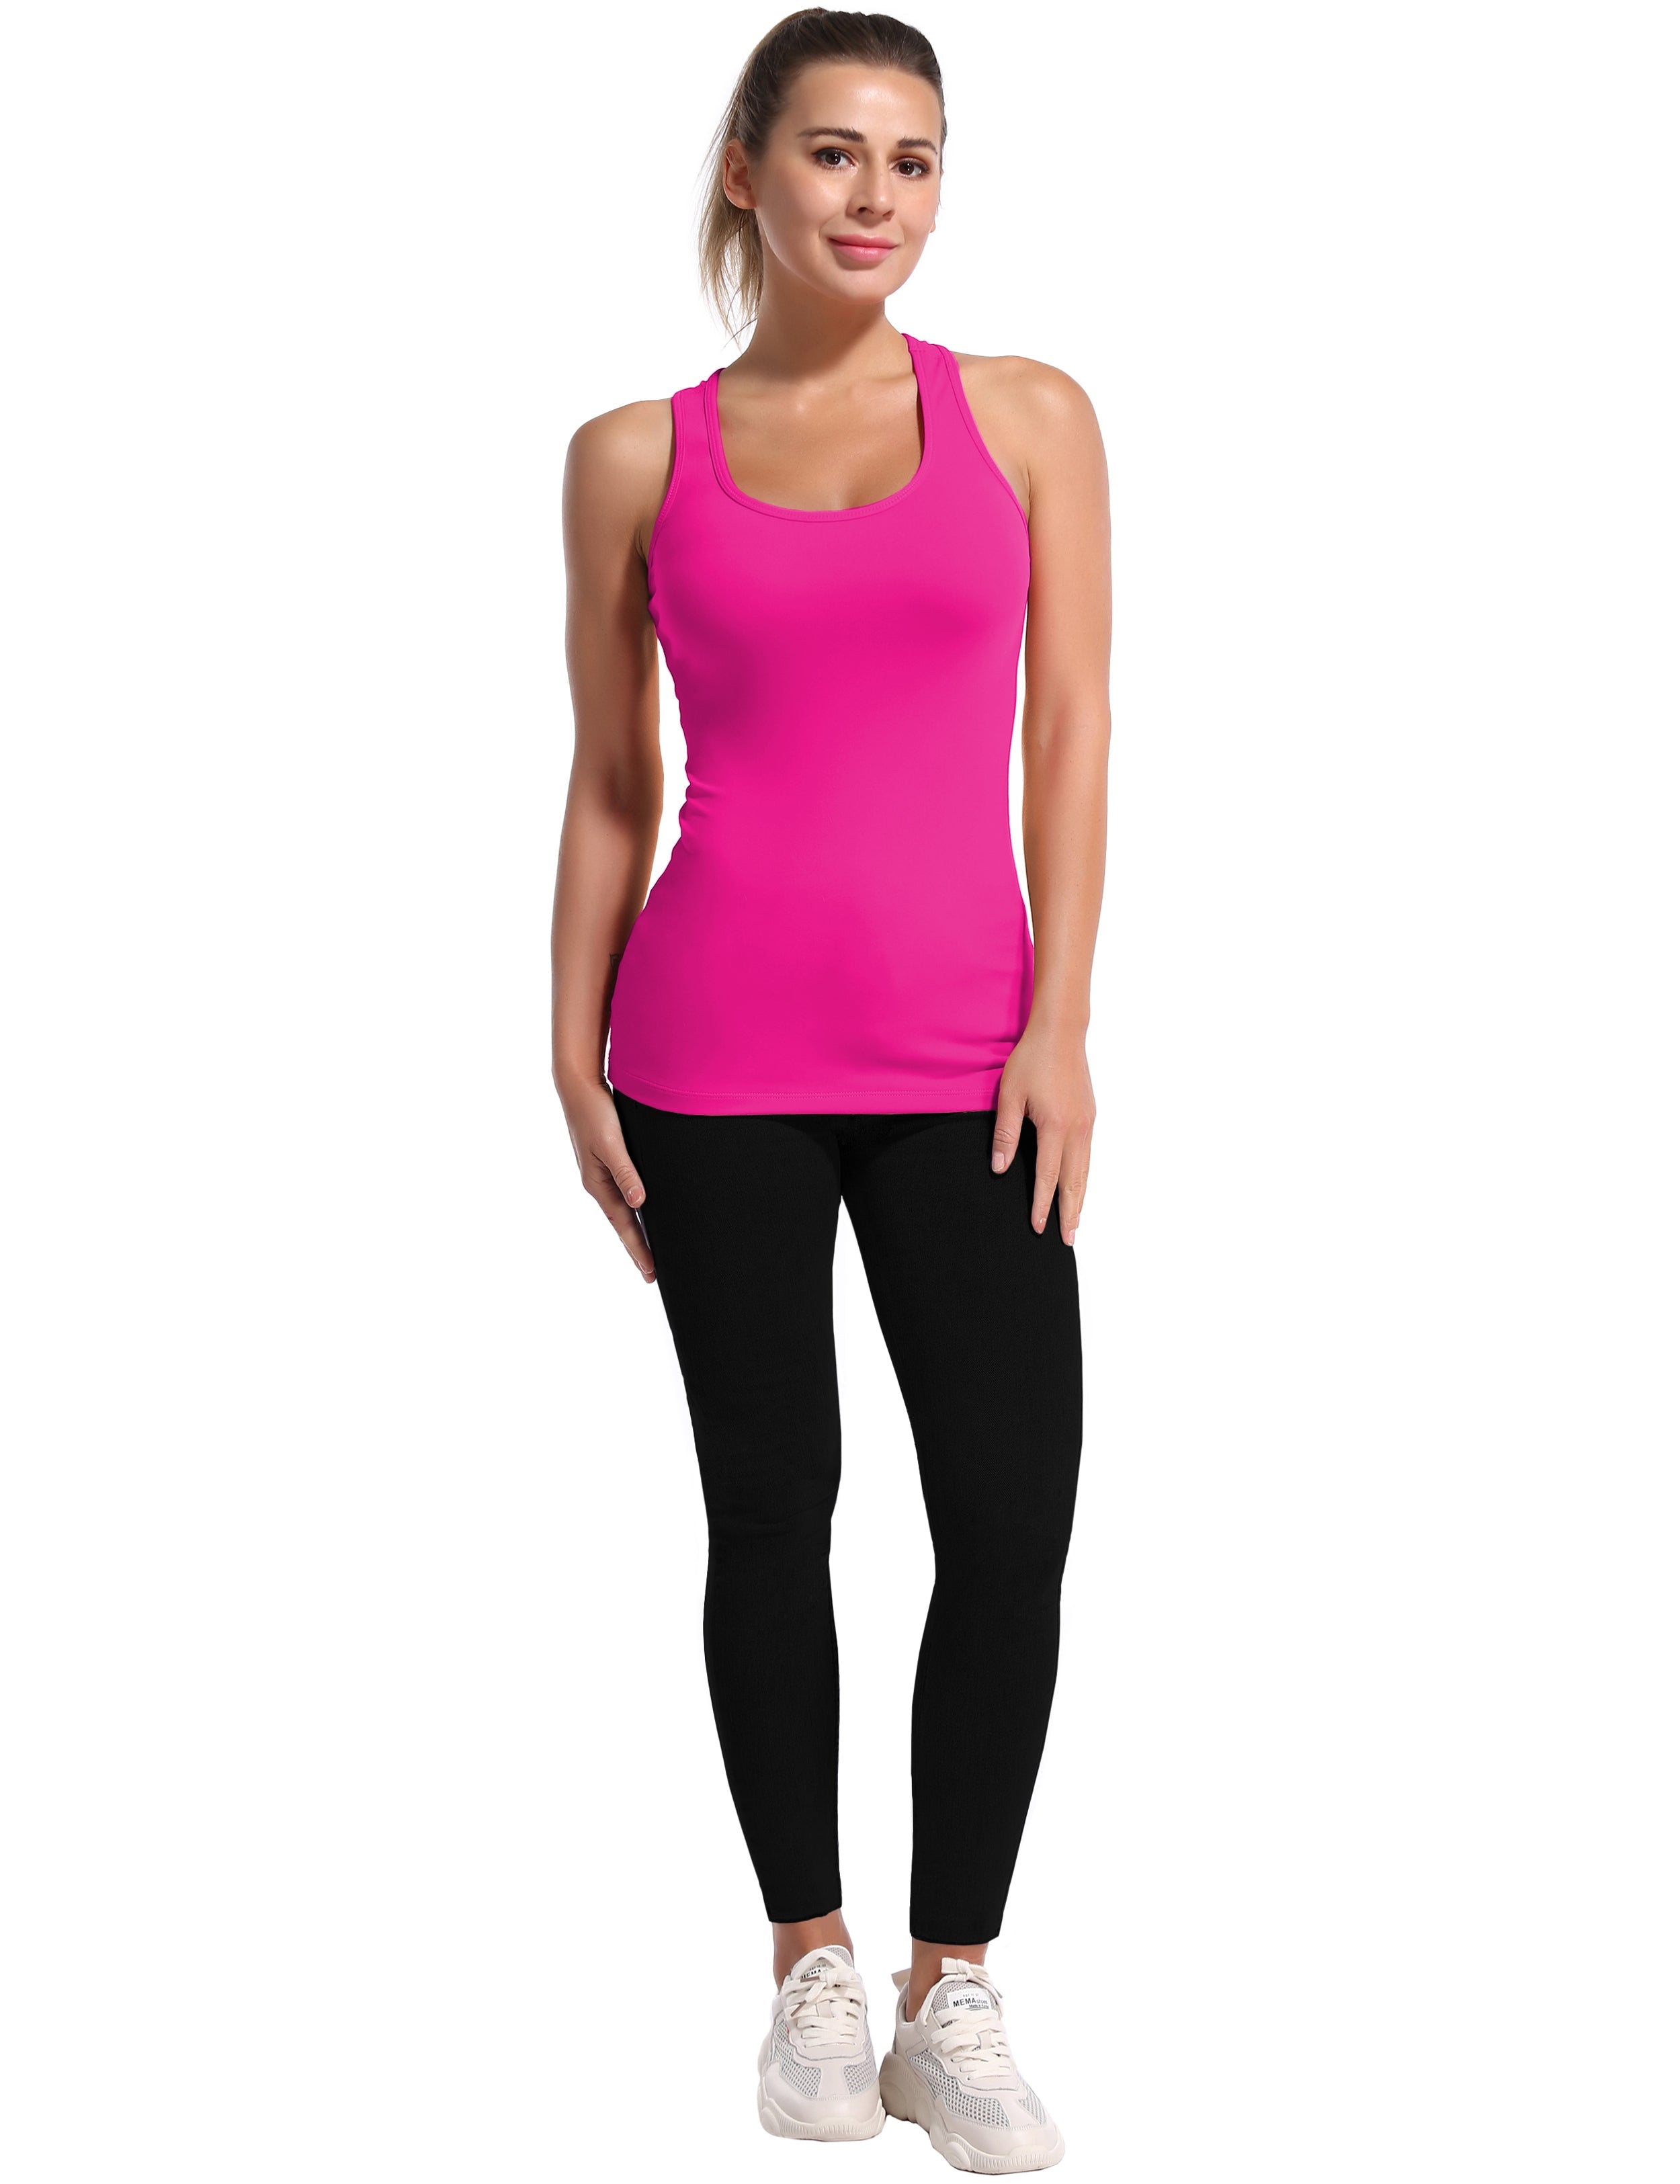 Racerback Athletic Tank Tops magenta 92%Nylon/8%Spandex(Cotton Soft) Designed for Yoga Tight Fit So buttery soft, it feels weightless Sweat-wicking Four-way stretch Breathable Contours your body Sits below the waistband for moderate, everyday coverage